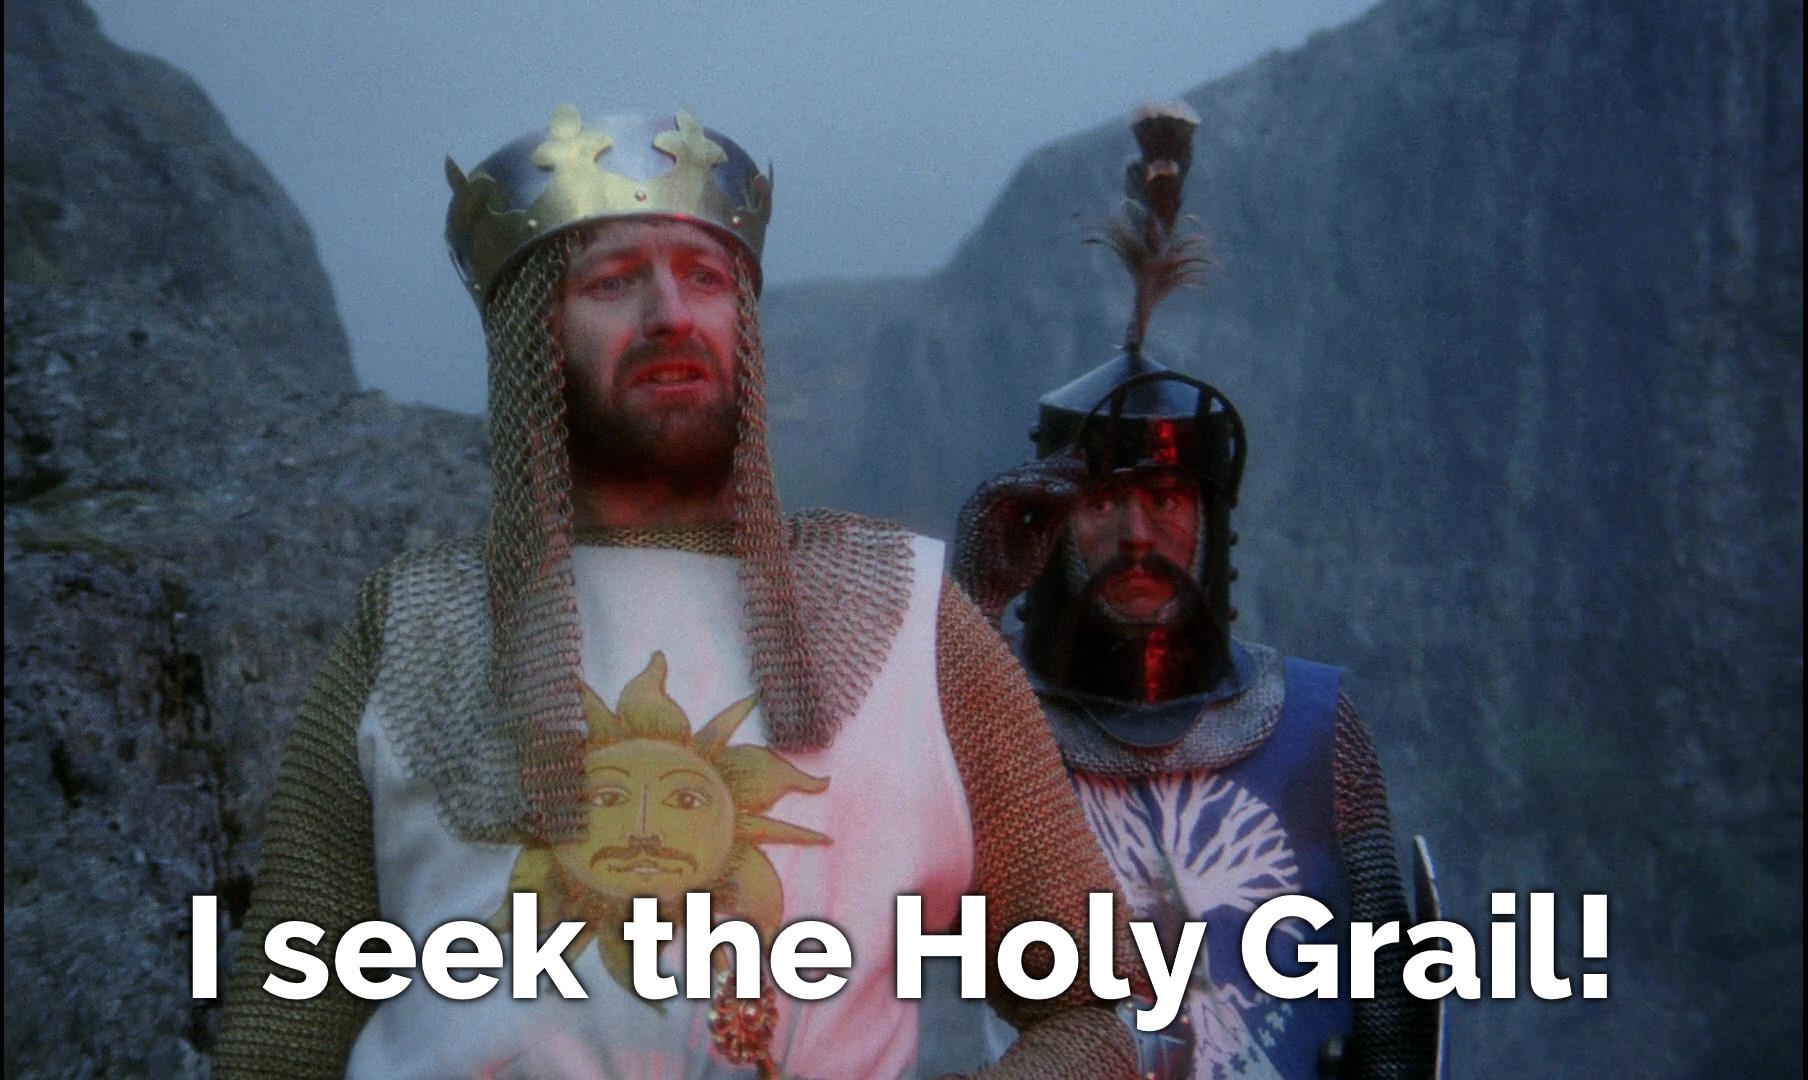 King Arthur, from the film Monty Python and the Quest for the Holy Grail, says "I see the Holy Grail."